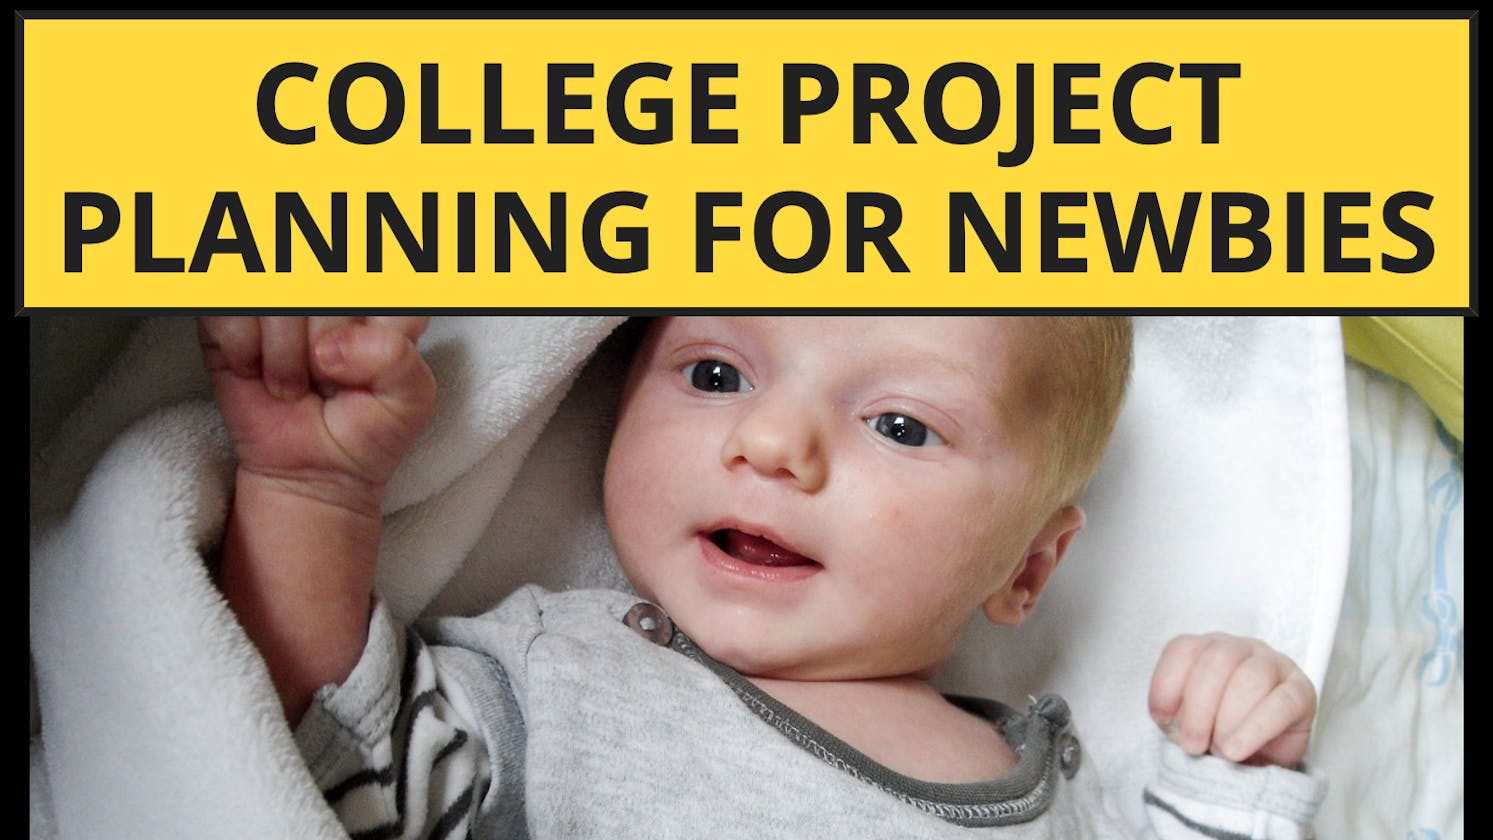 College Project Planning for Newbies